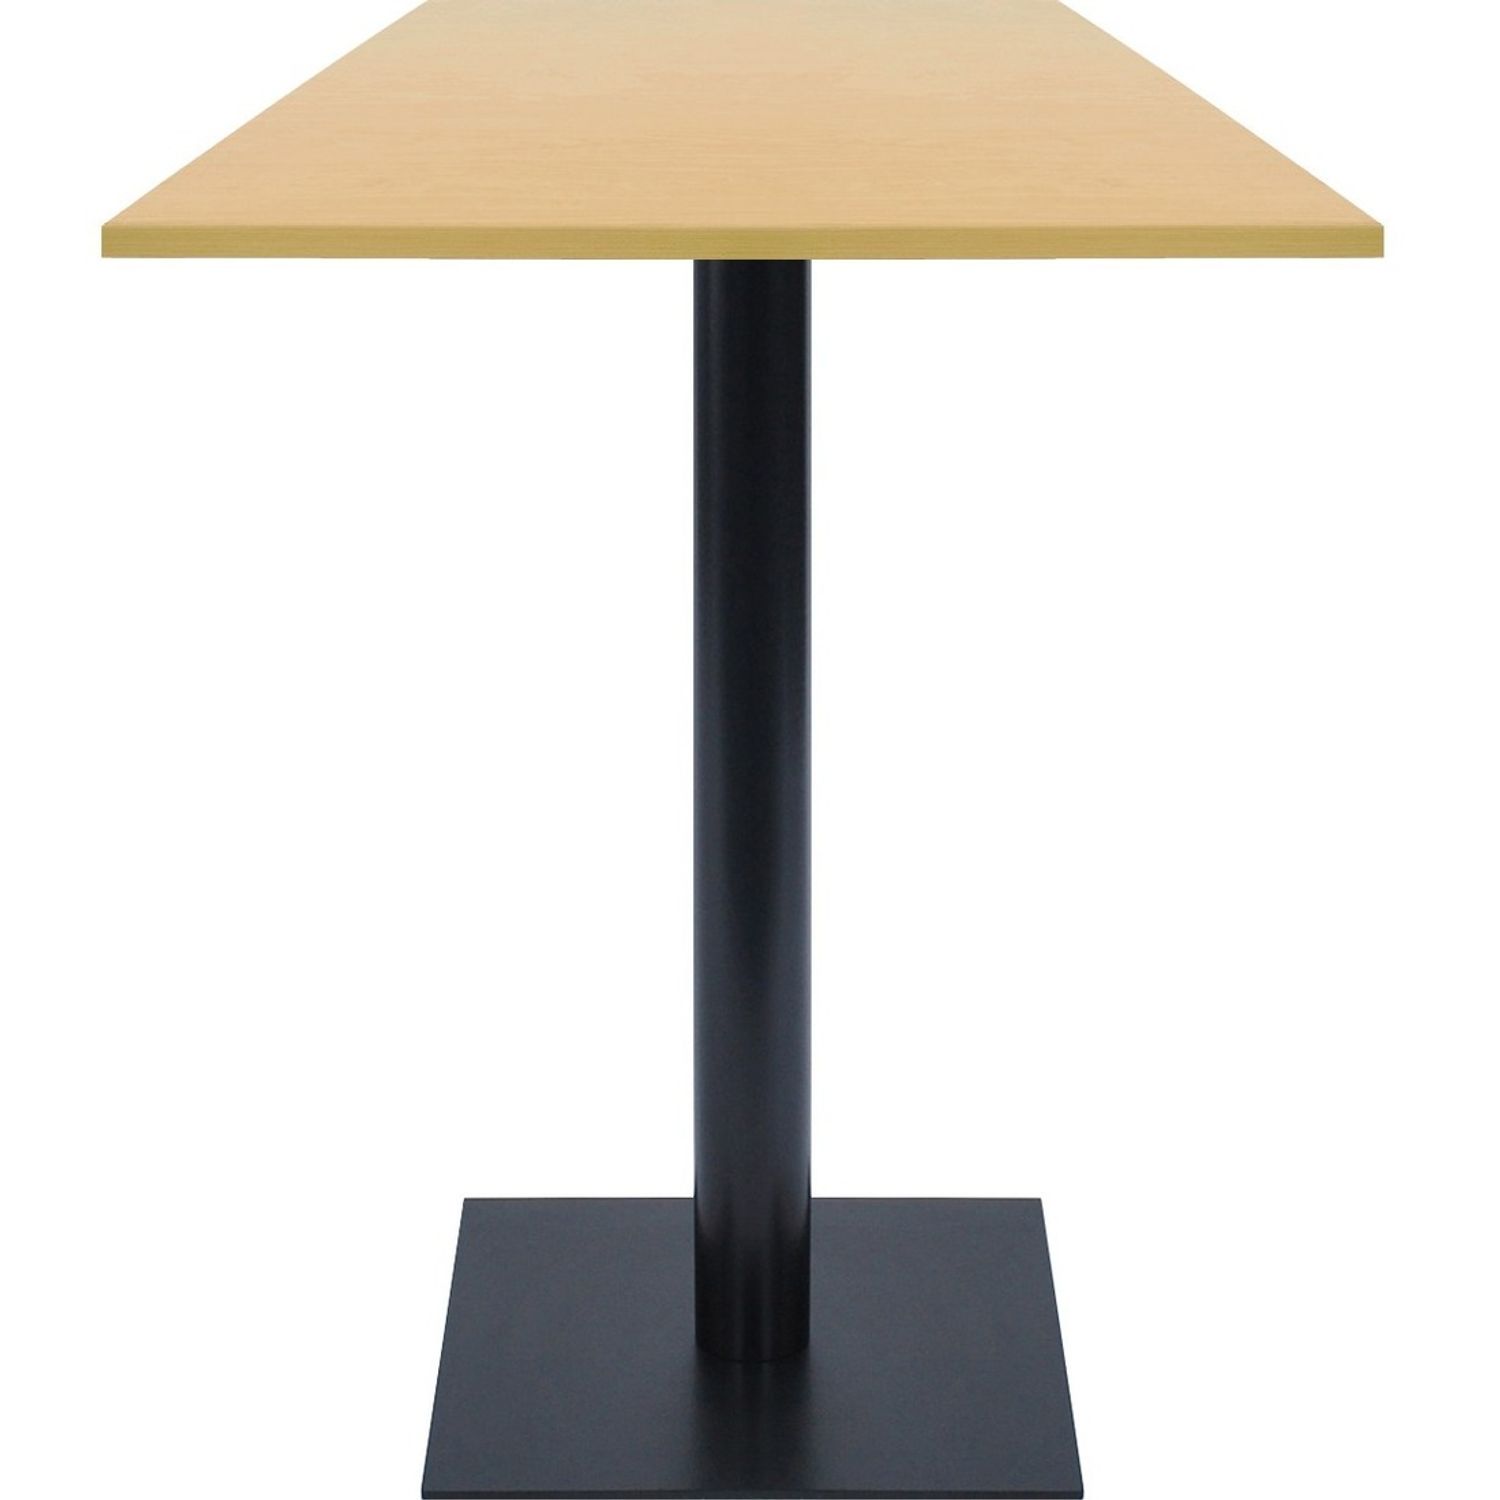 Sienna Hospitality Table High Pressure Laminate (HPL) Square Top, Powder Coated Base x 42" Table Top Width x 42" Table Top Depth x 1.25" Table Top Thickness, 29" Height, Assembly Required